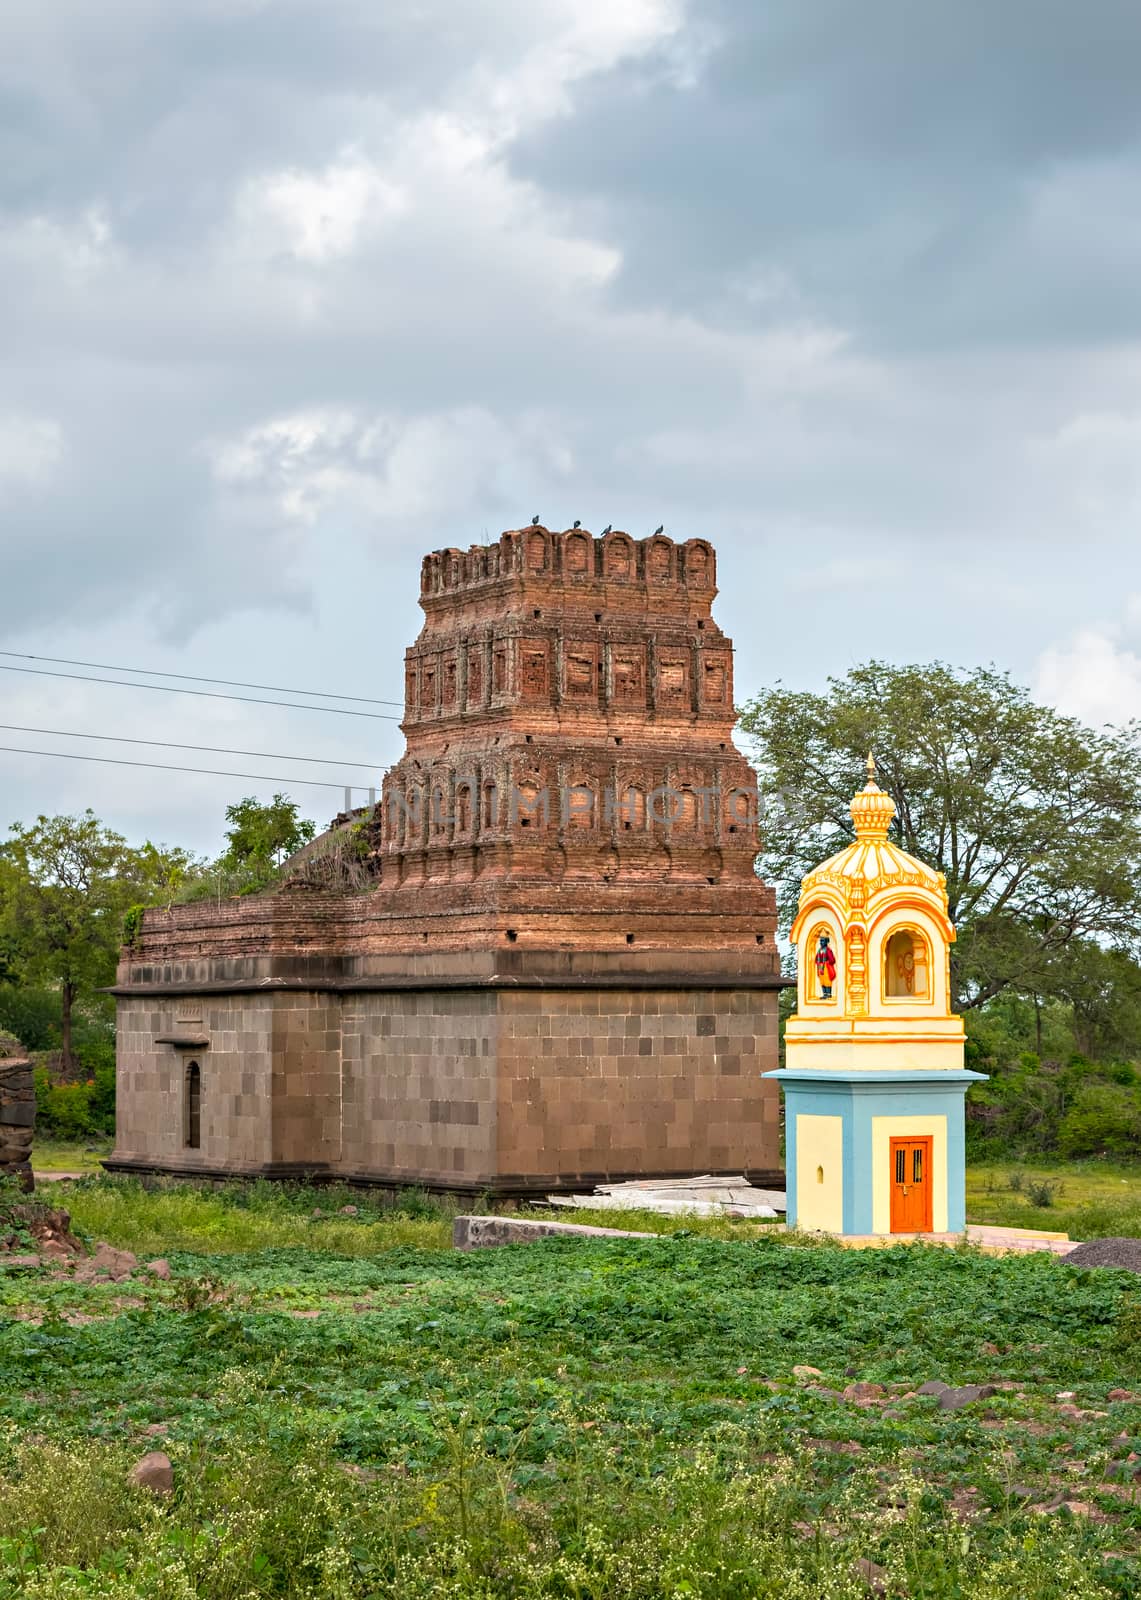 Small , colorful temple and landscape in village Ambale, Maharashtra, India. by lalam